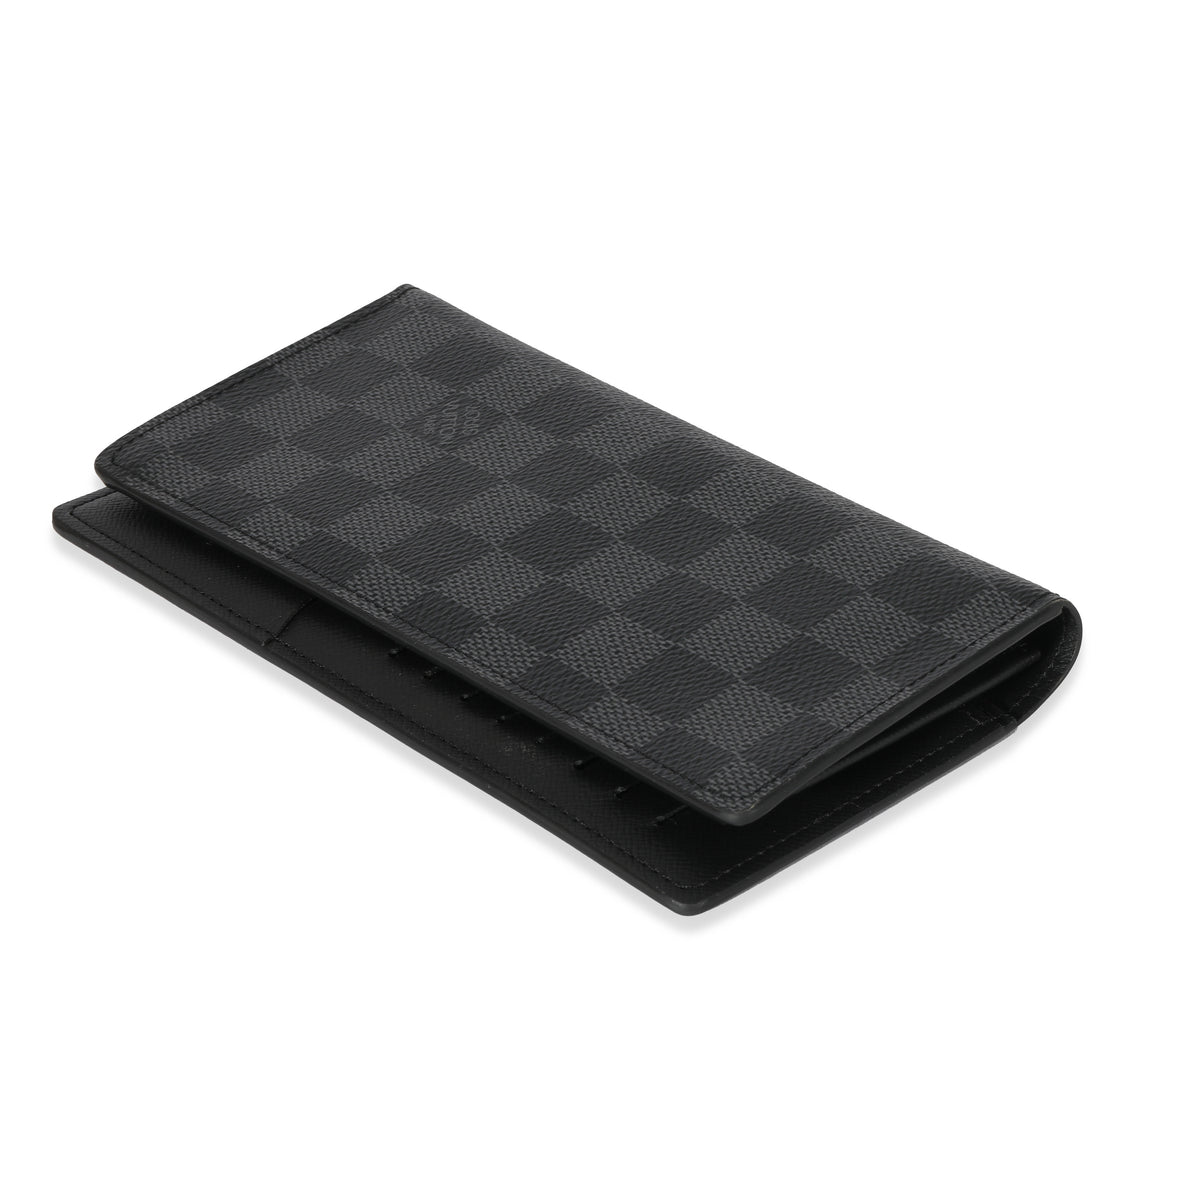 Brazza Wallet Damier Graphite Canvas - Wallets and Small Leather